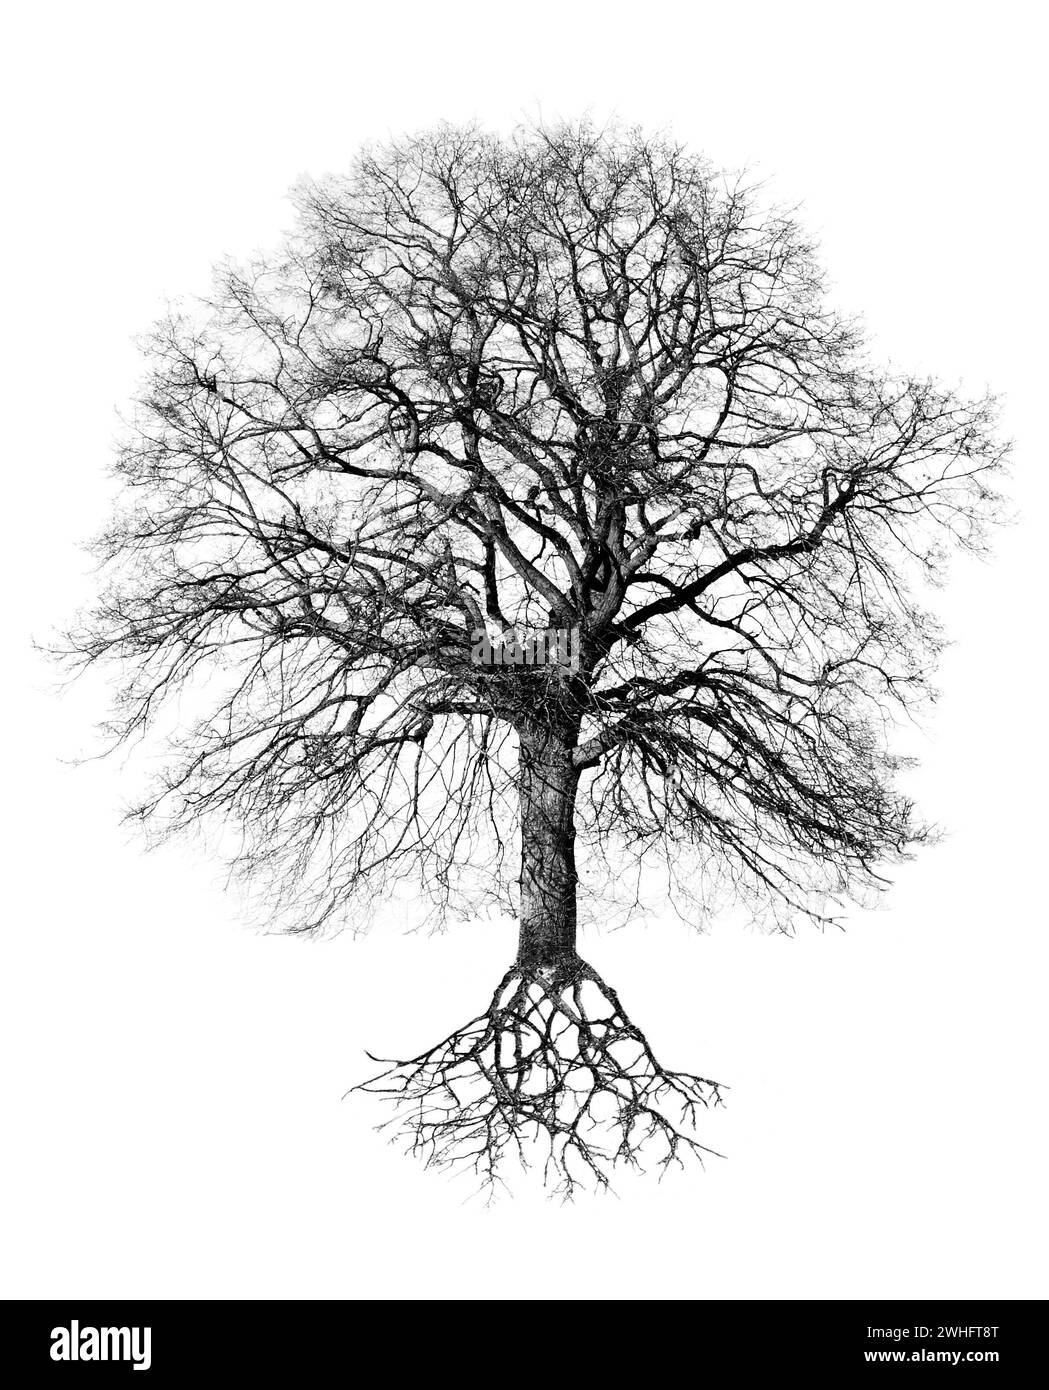 Illustration of a tree based on a photo Stock Photo